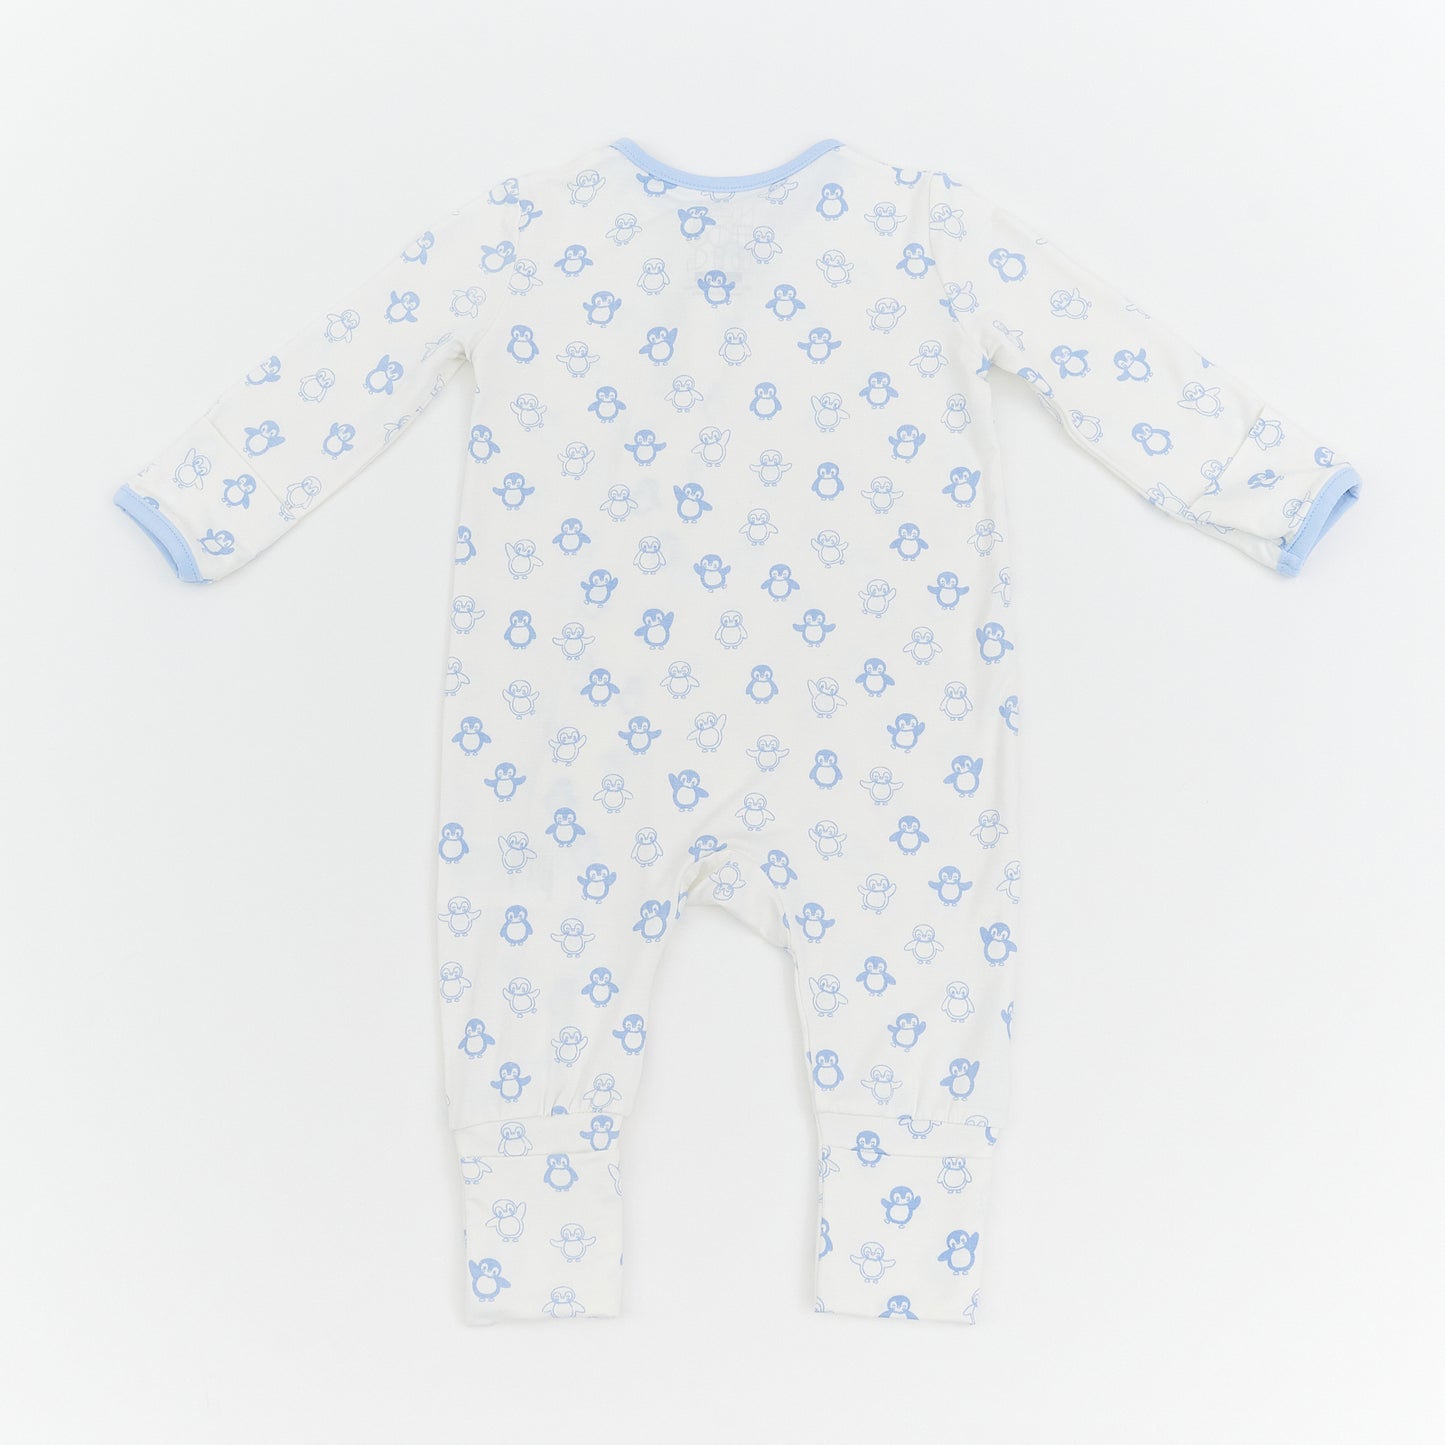 Not Too Big Penguin Bamboo Sleepsuit - 2 Pack